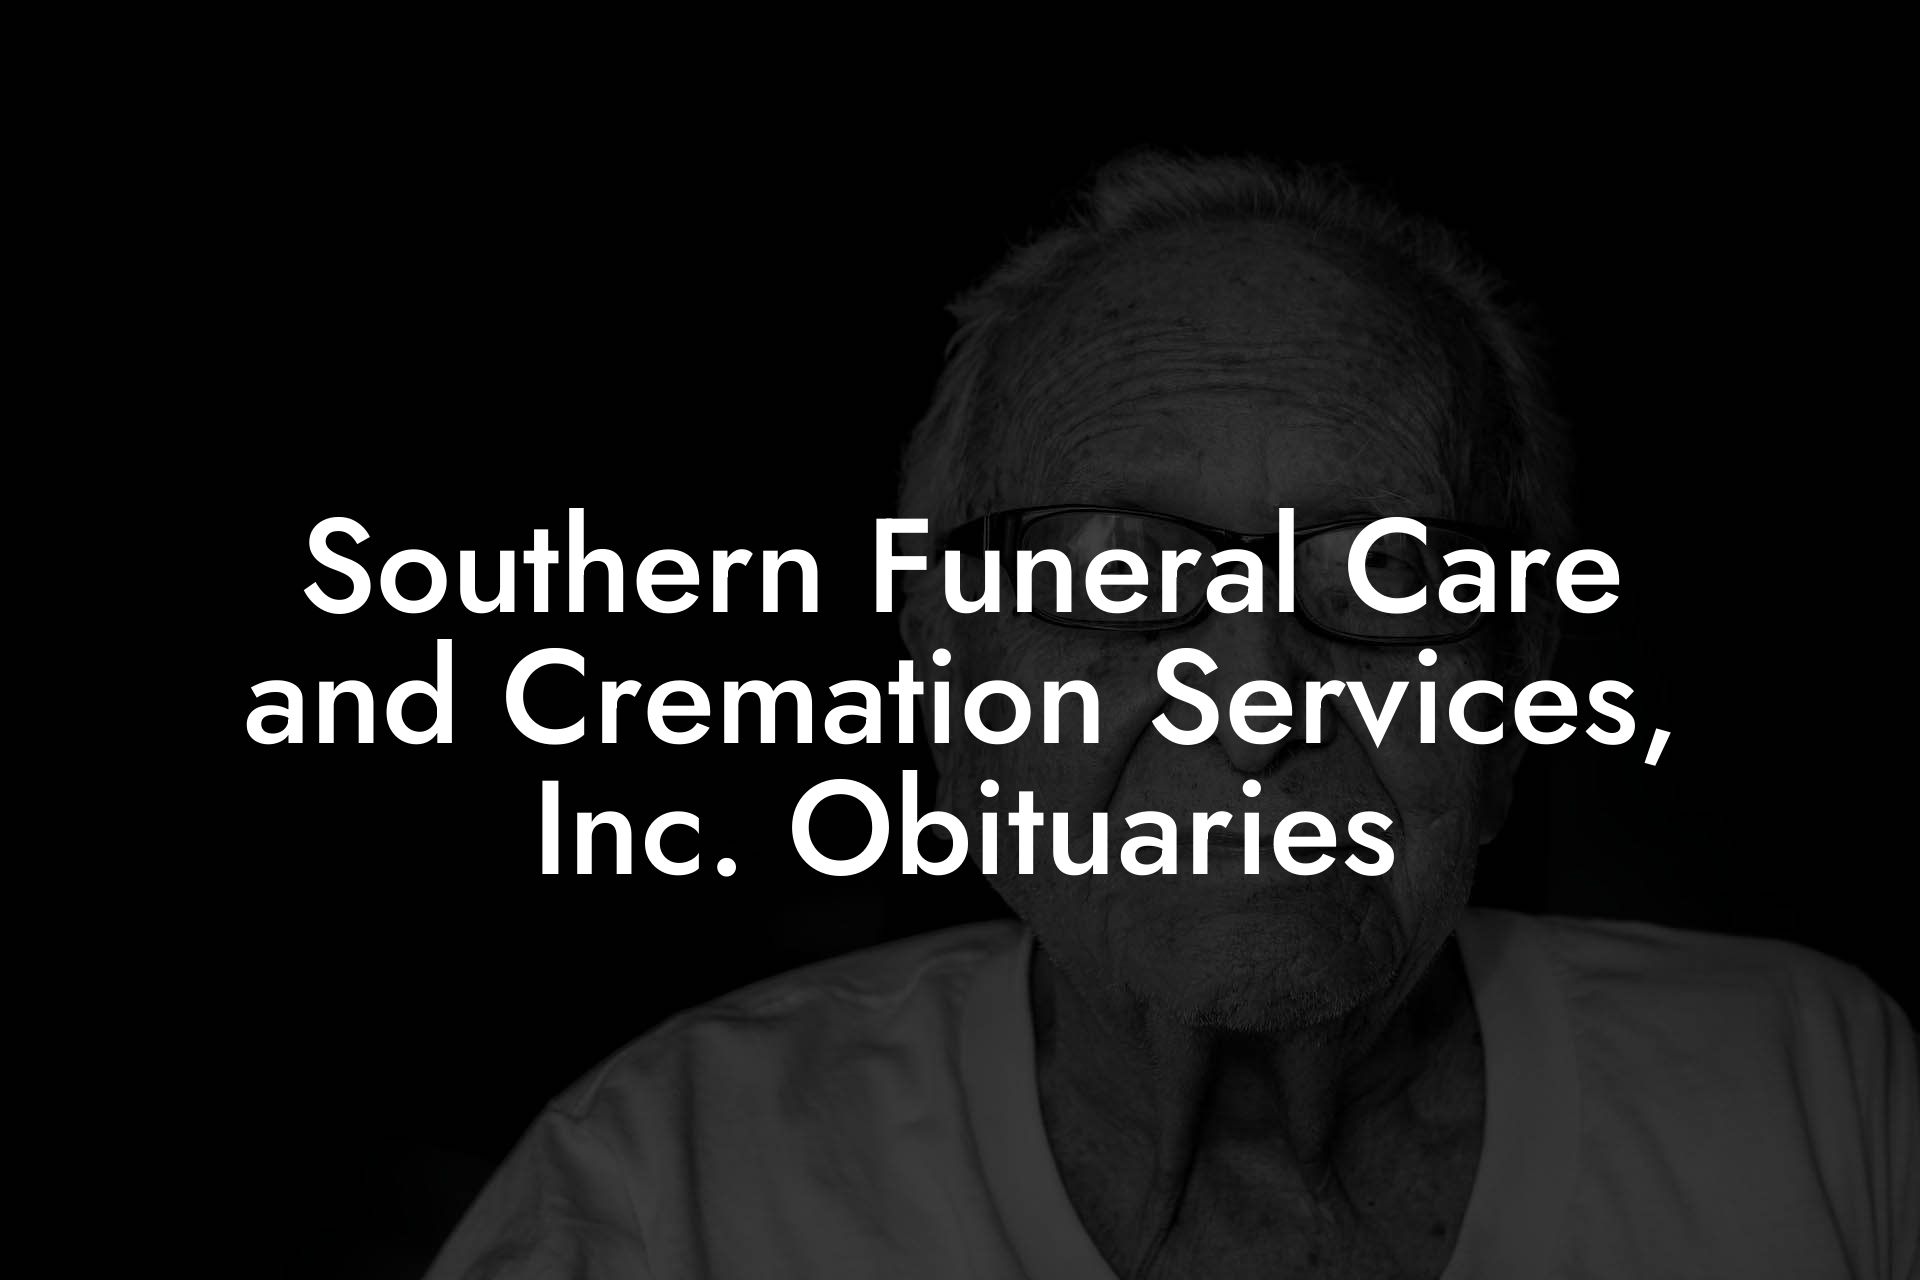 Southern Funeral Care and Cremation Services, Inc. Obituaries